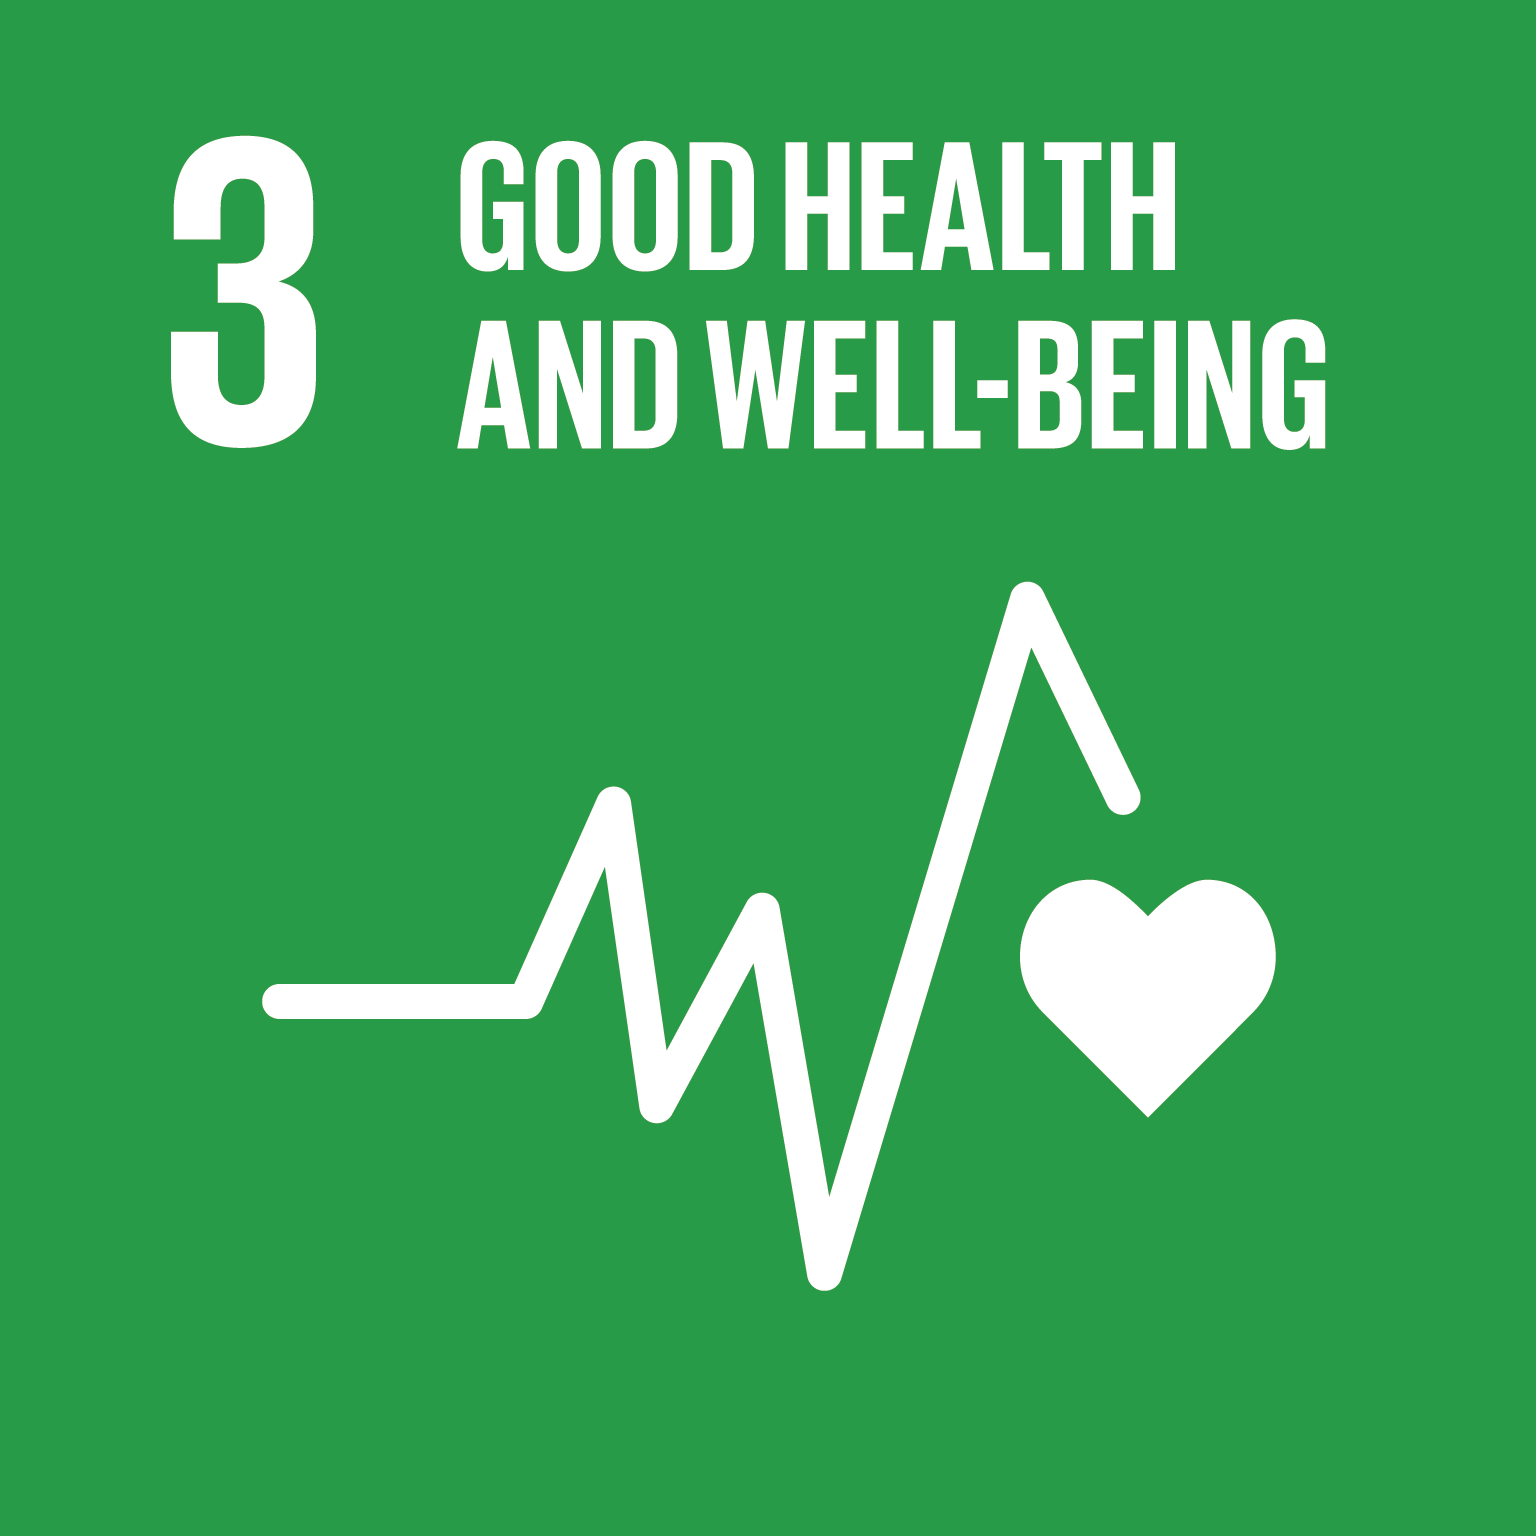 SDG 3 Good health and well-being